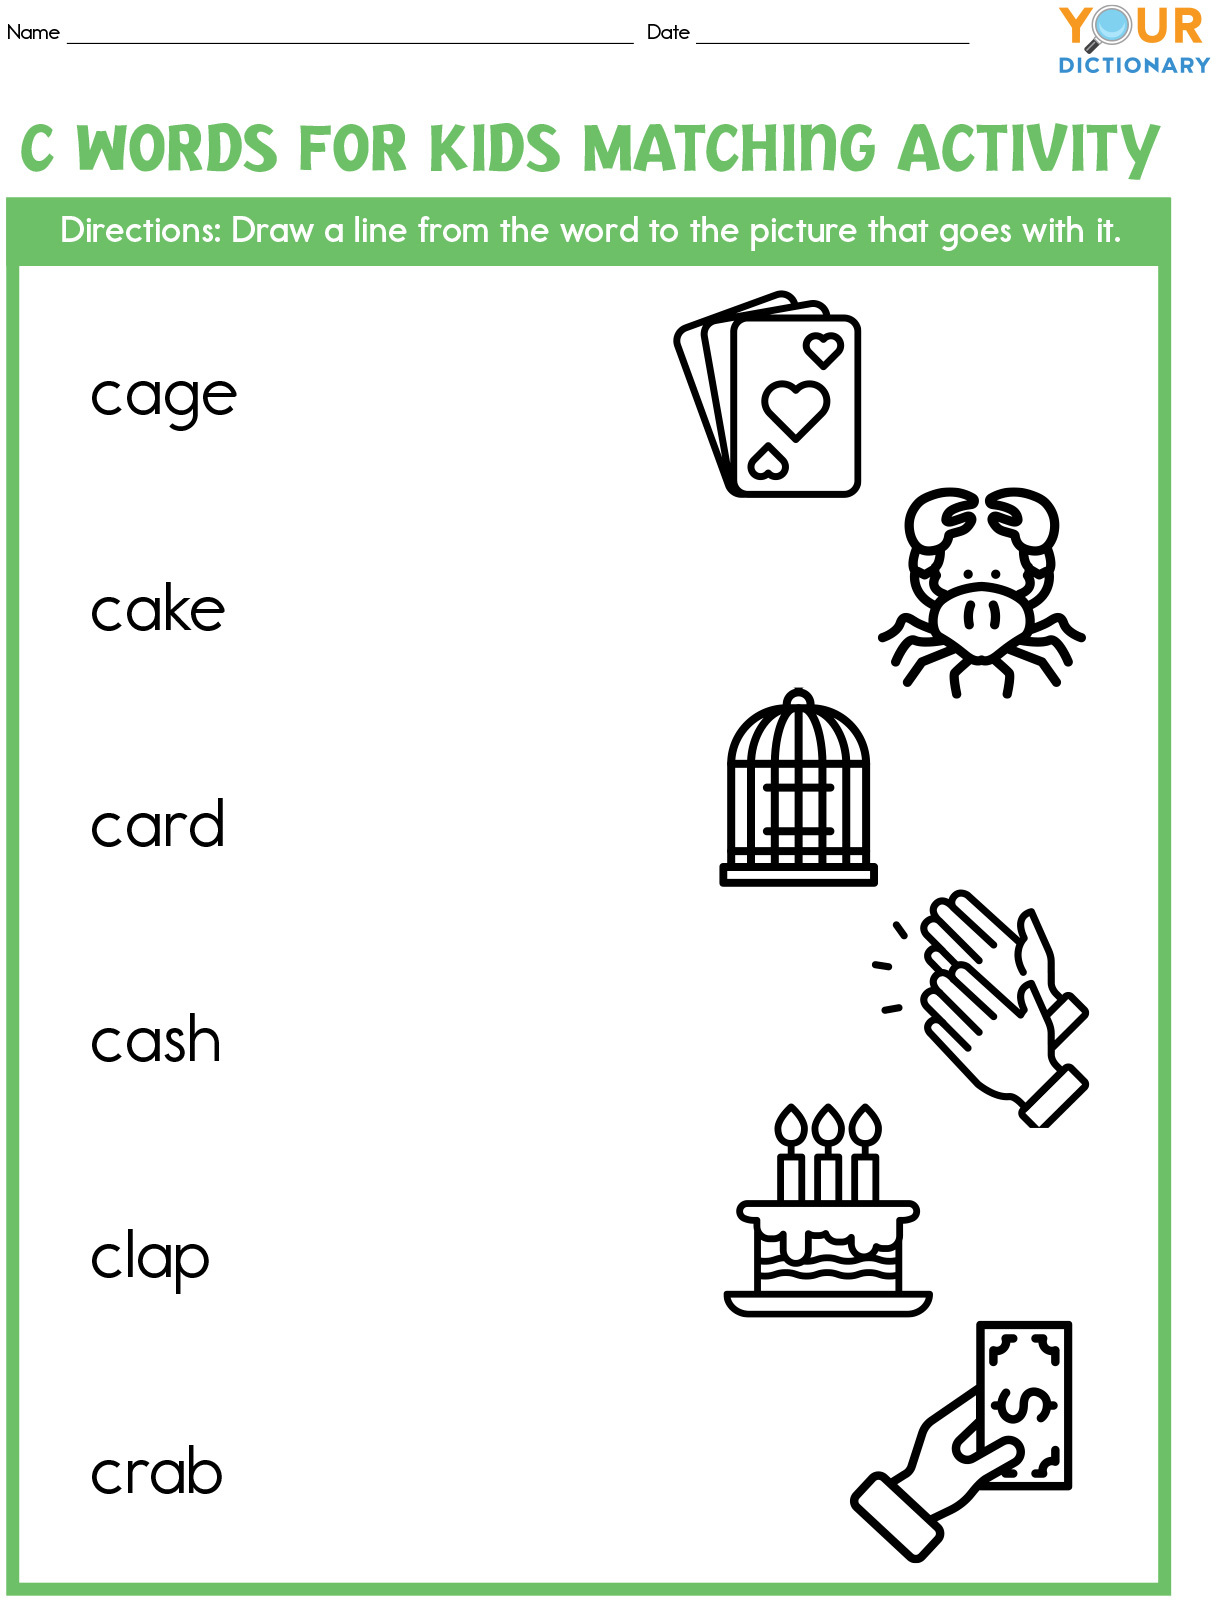 c words for kids matching activity worksheet